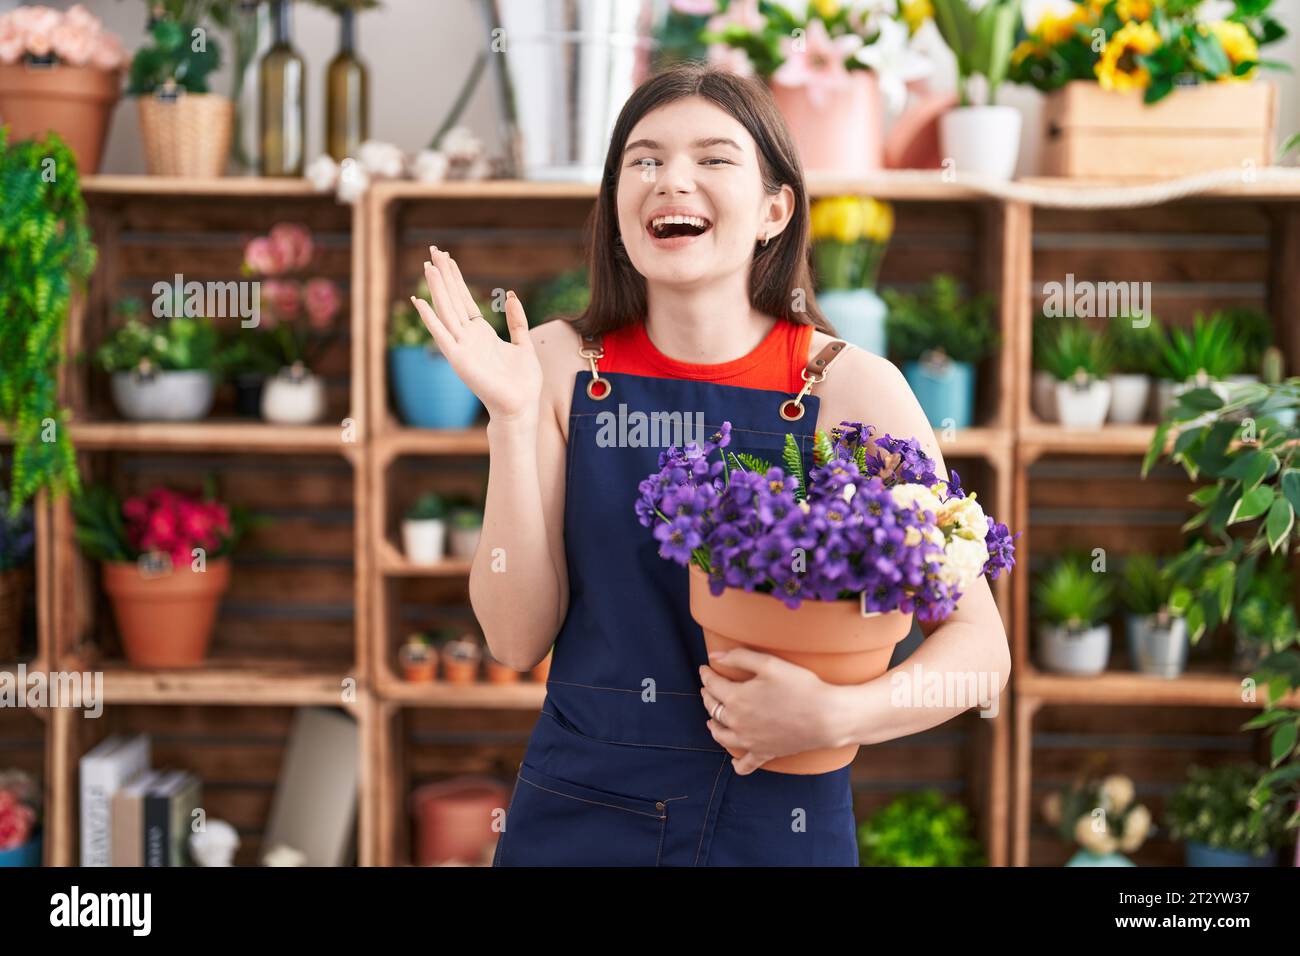 Young caucasian woman working at florist shop holding pot with flowers celebrating victory with happy smile and winner expression with raised hands Stock Photo